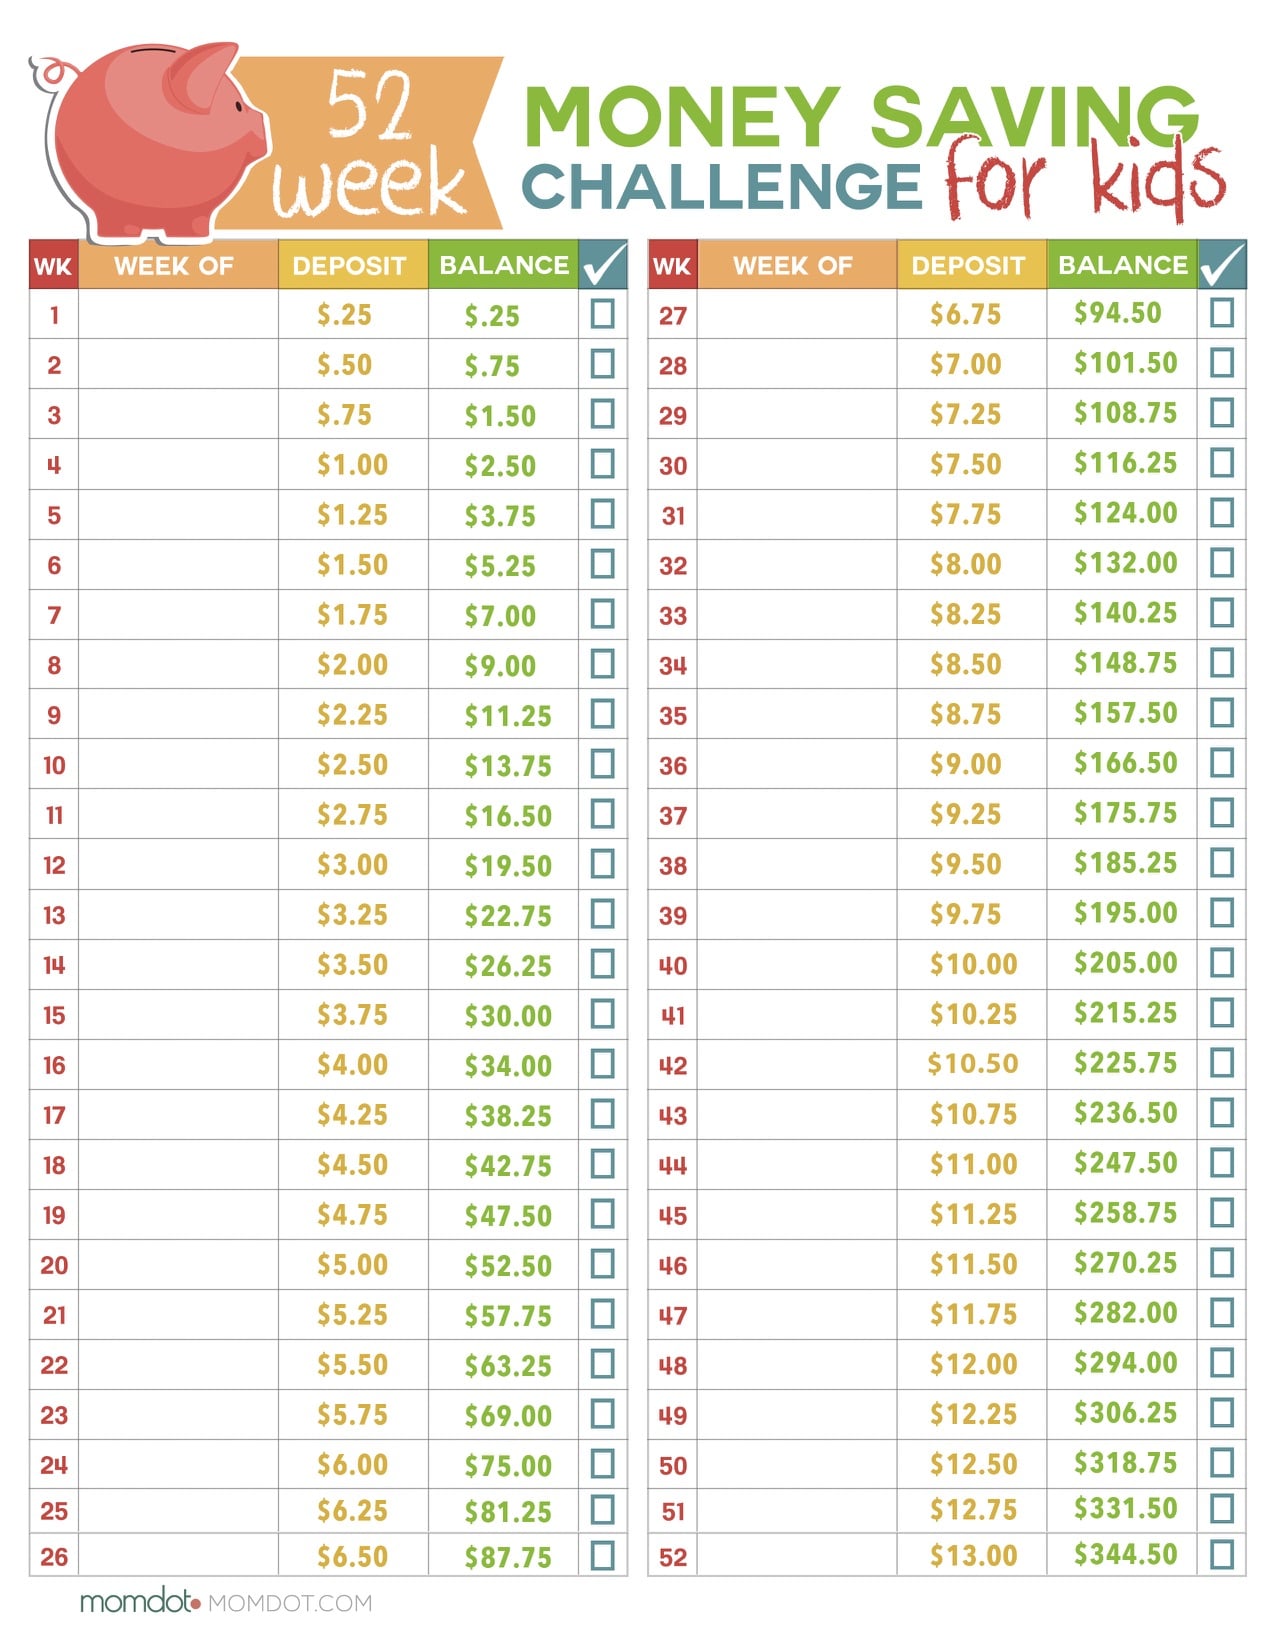 52 Week Money Challenge for Kids - great learning for kids this year on how to earn, save, and the impact it can make long term for them